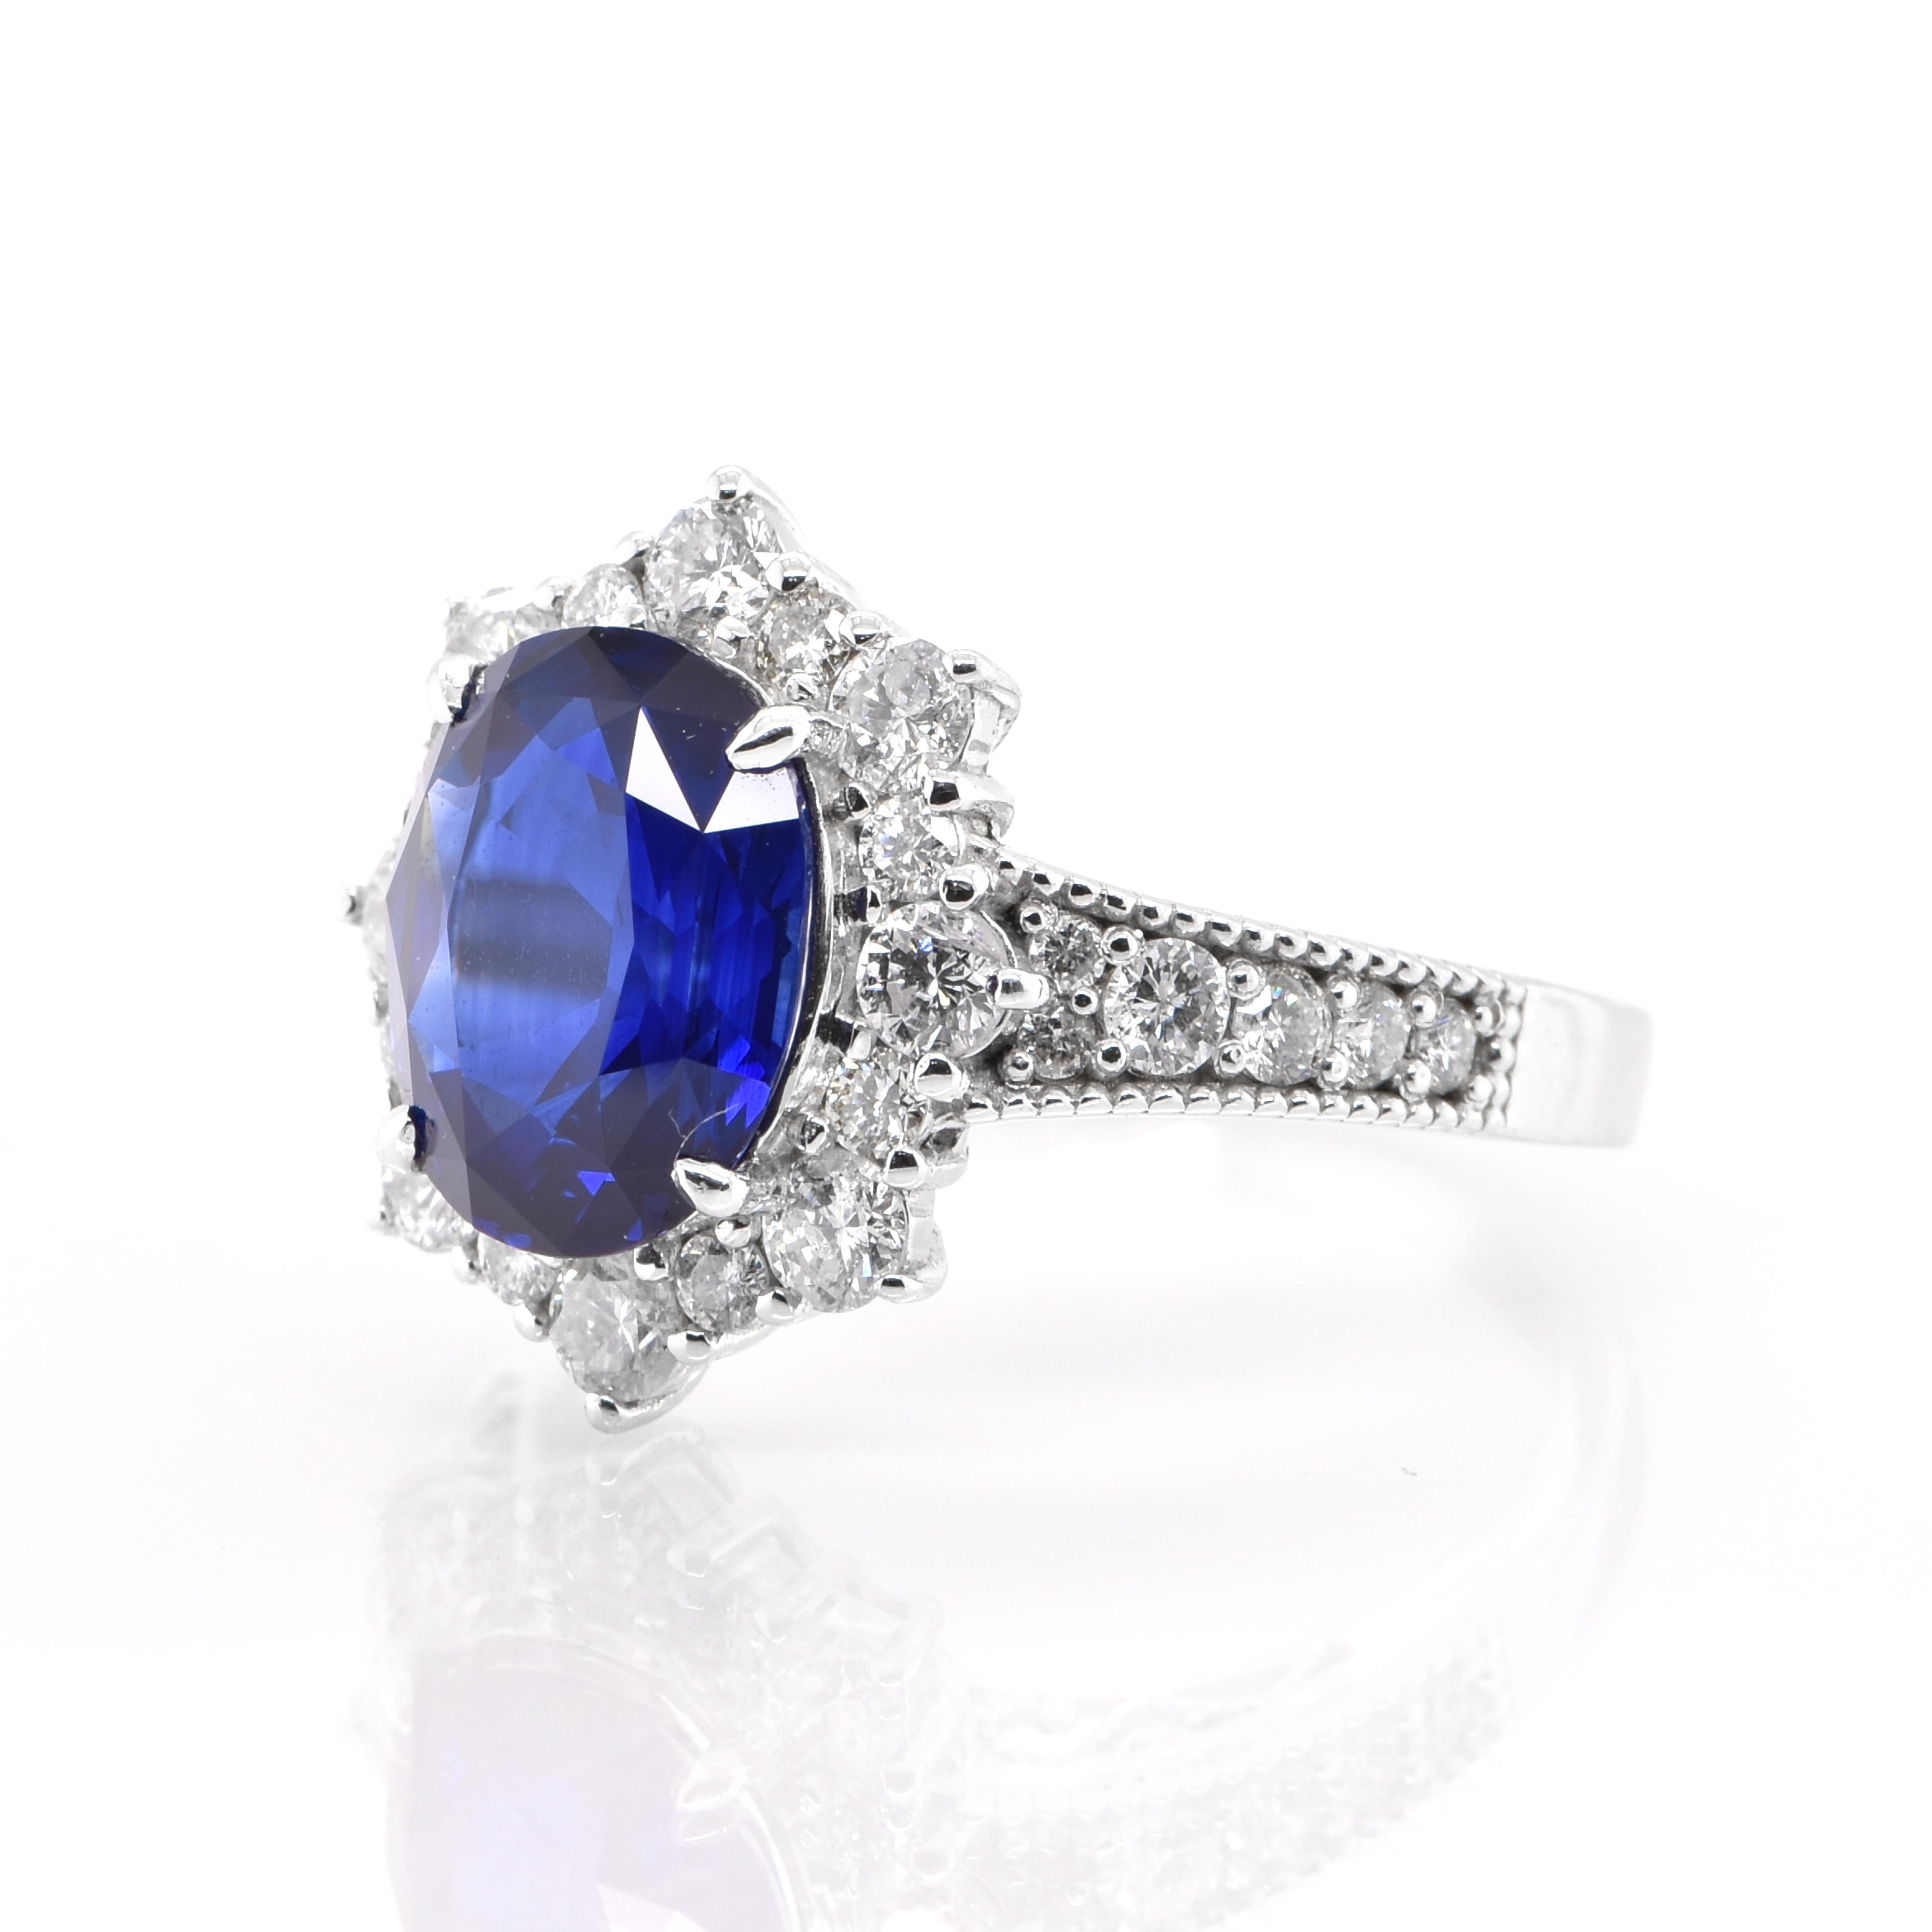 A beautiful Engagement Ring featuring a GIA Certified, 3.50 Carat, Natural Sapphire and 0.99 Carats of Diamond Accents set in Platinum. Sapphires have extraordinary durability - they excel in hardness as well as toughness and durability making them